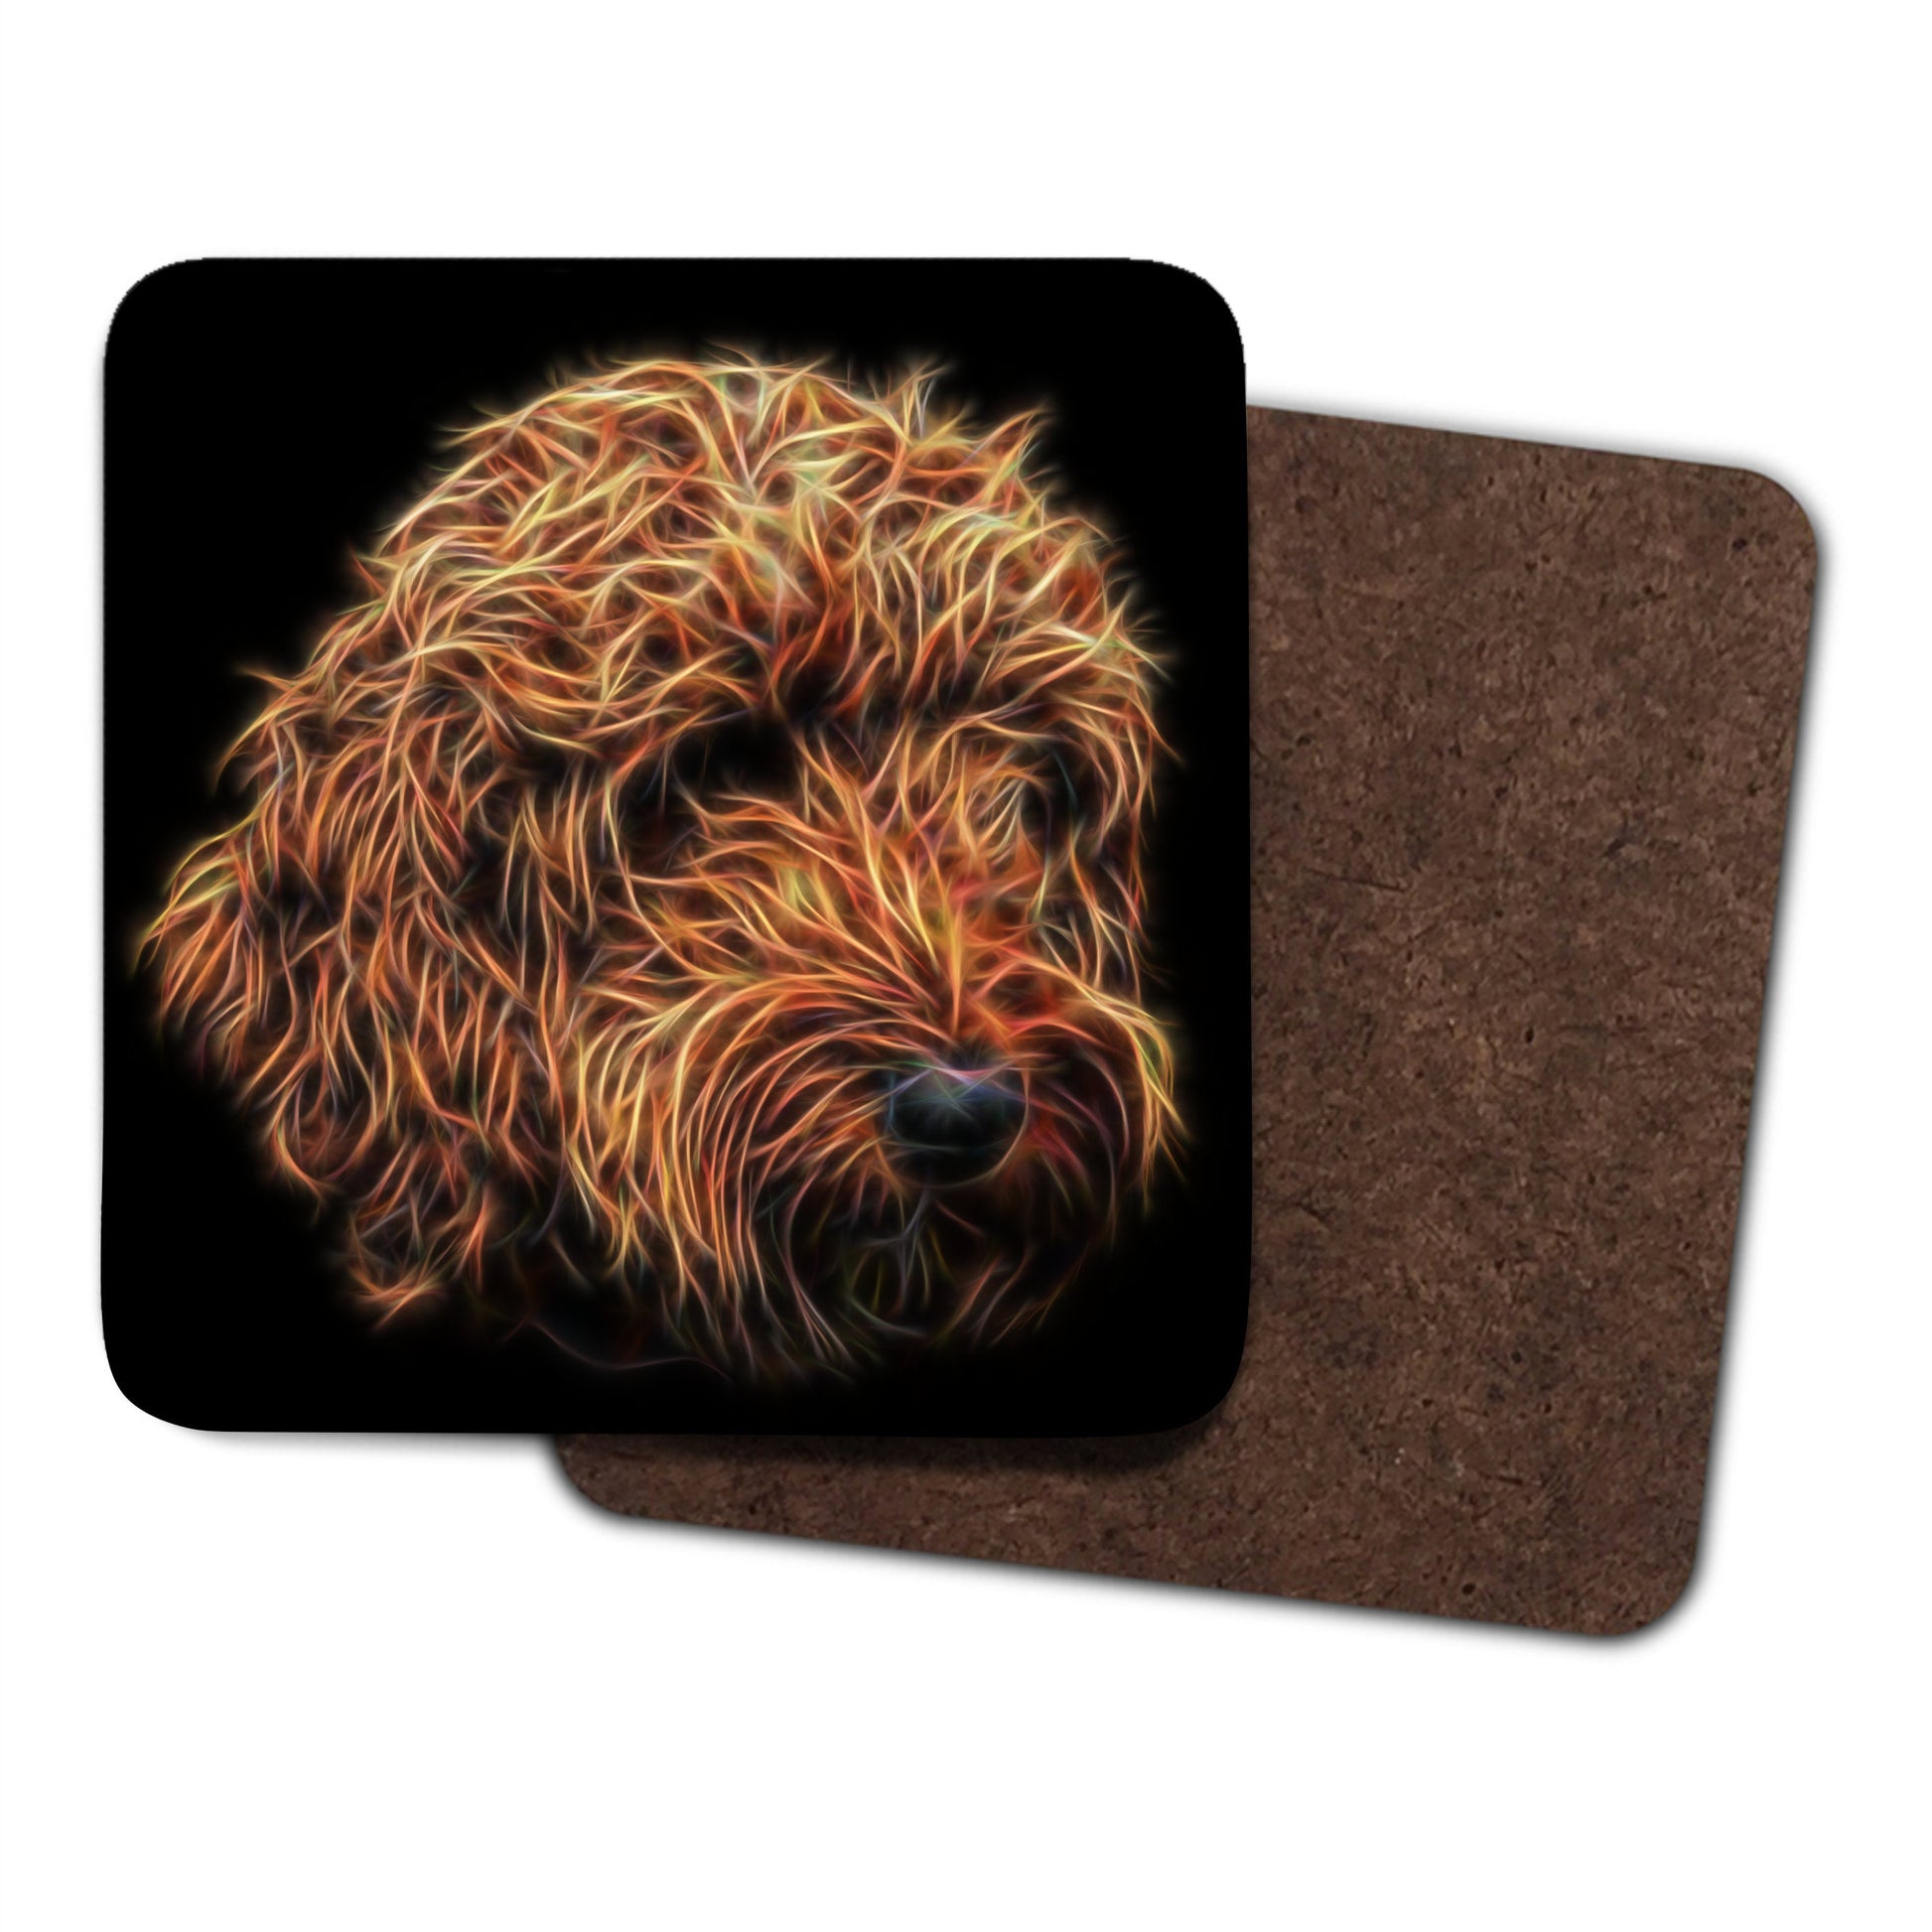 Red Labradoodle Coasters, Set of 2, with Stunning Fractal Art Design